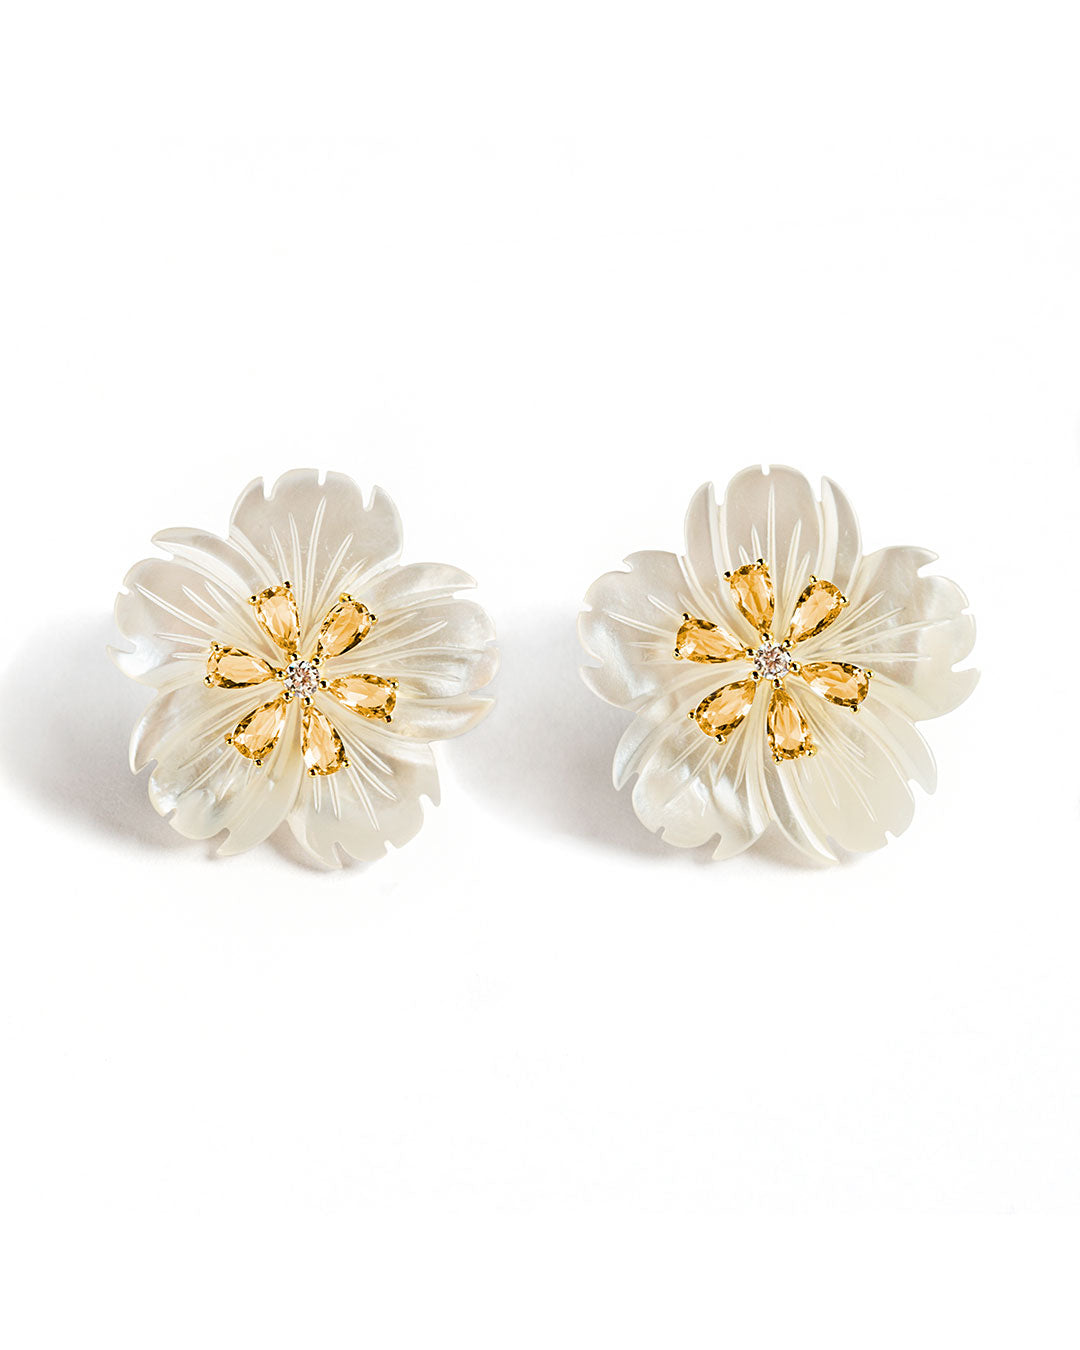 925 GOLD PLATED FLOWER EARRINGS WITH MOTHER OF PEARL AND YELLOW CRYSTALS